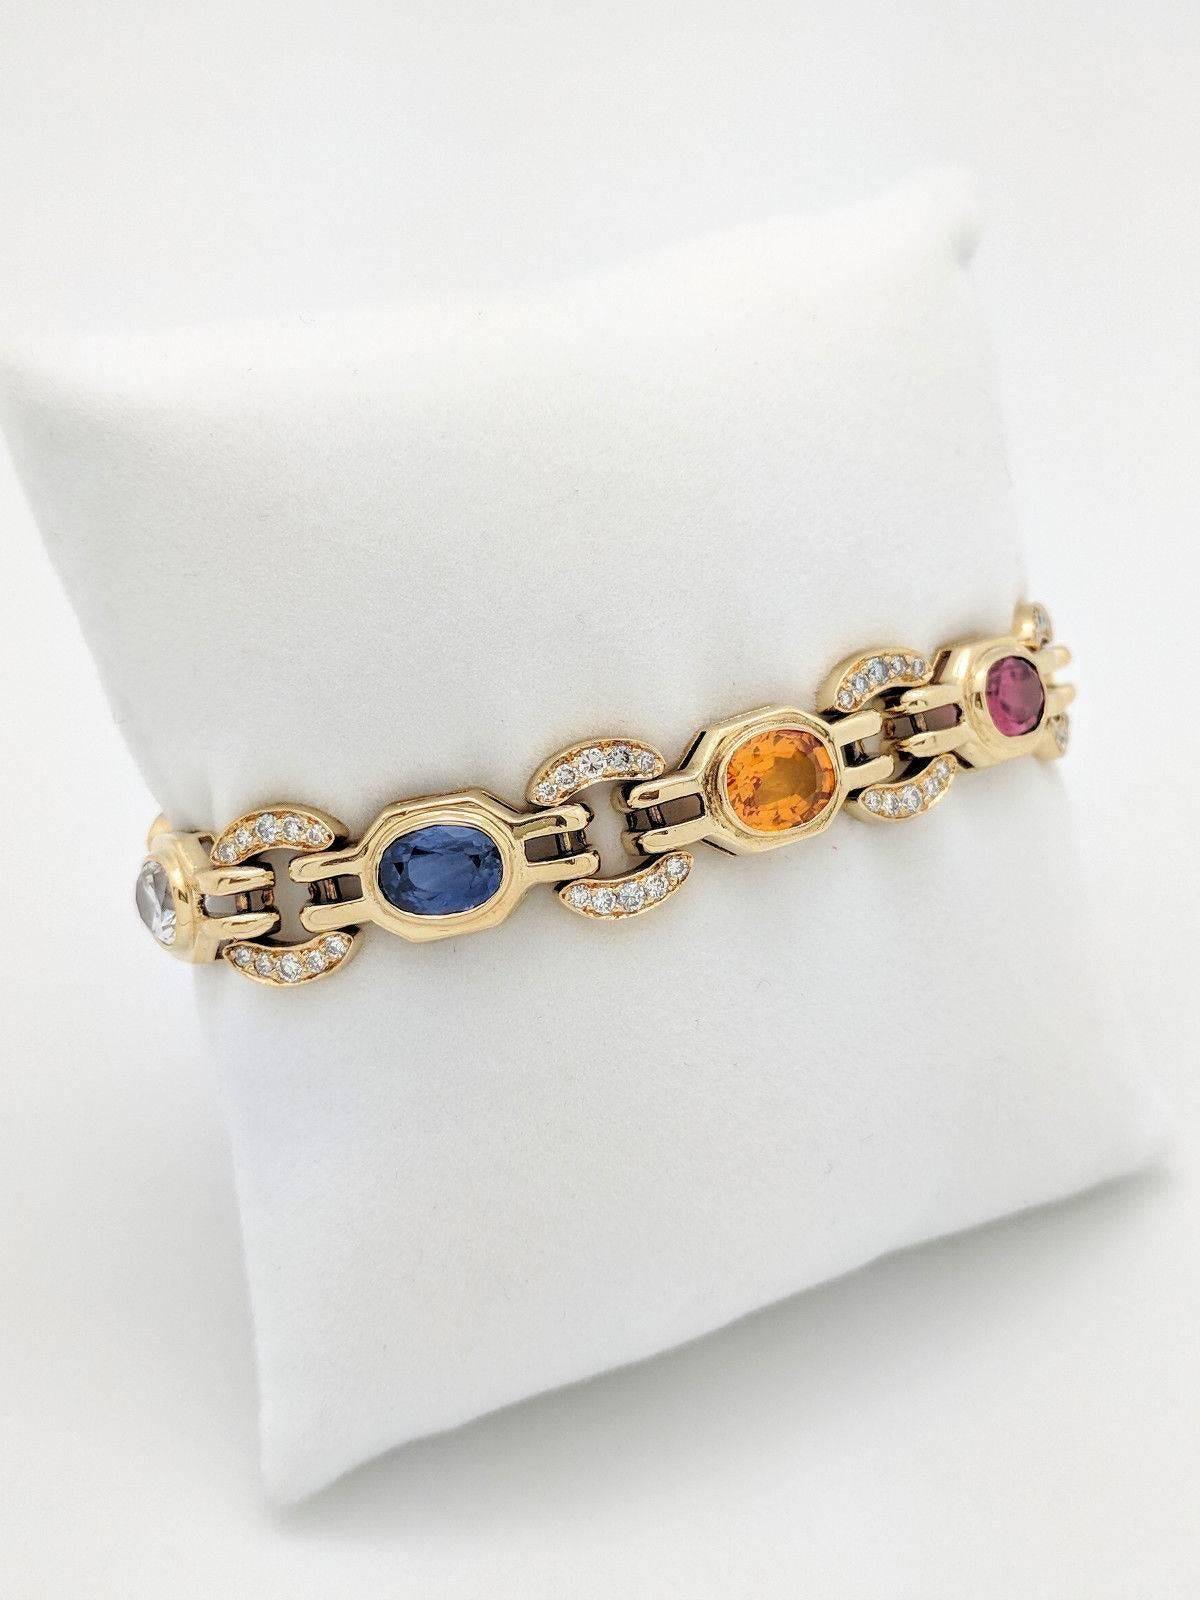 Modern Ladies 18k Yellow Gold Multi-Colored Sapphire and Diamond Bracelet 31.2 Grams For Sale